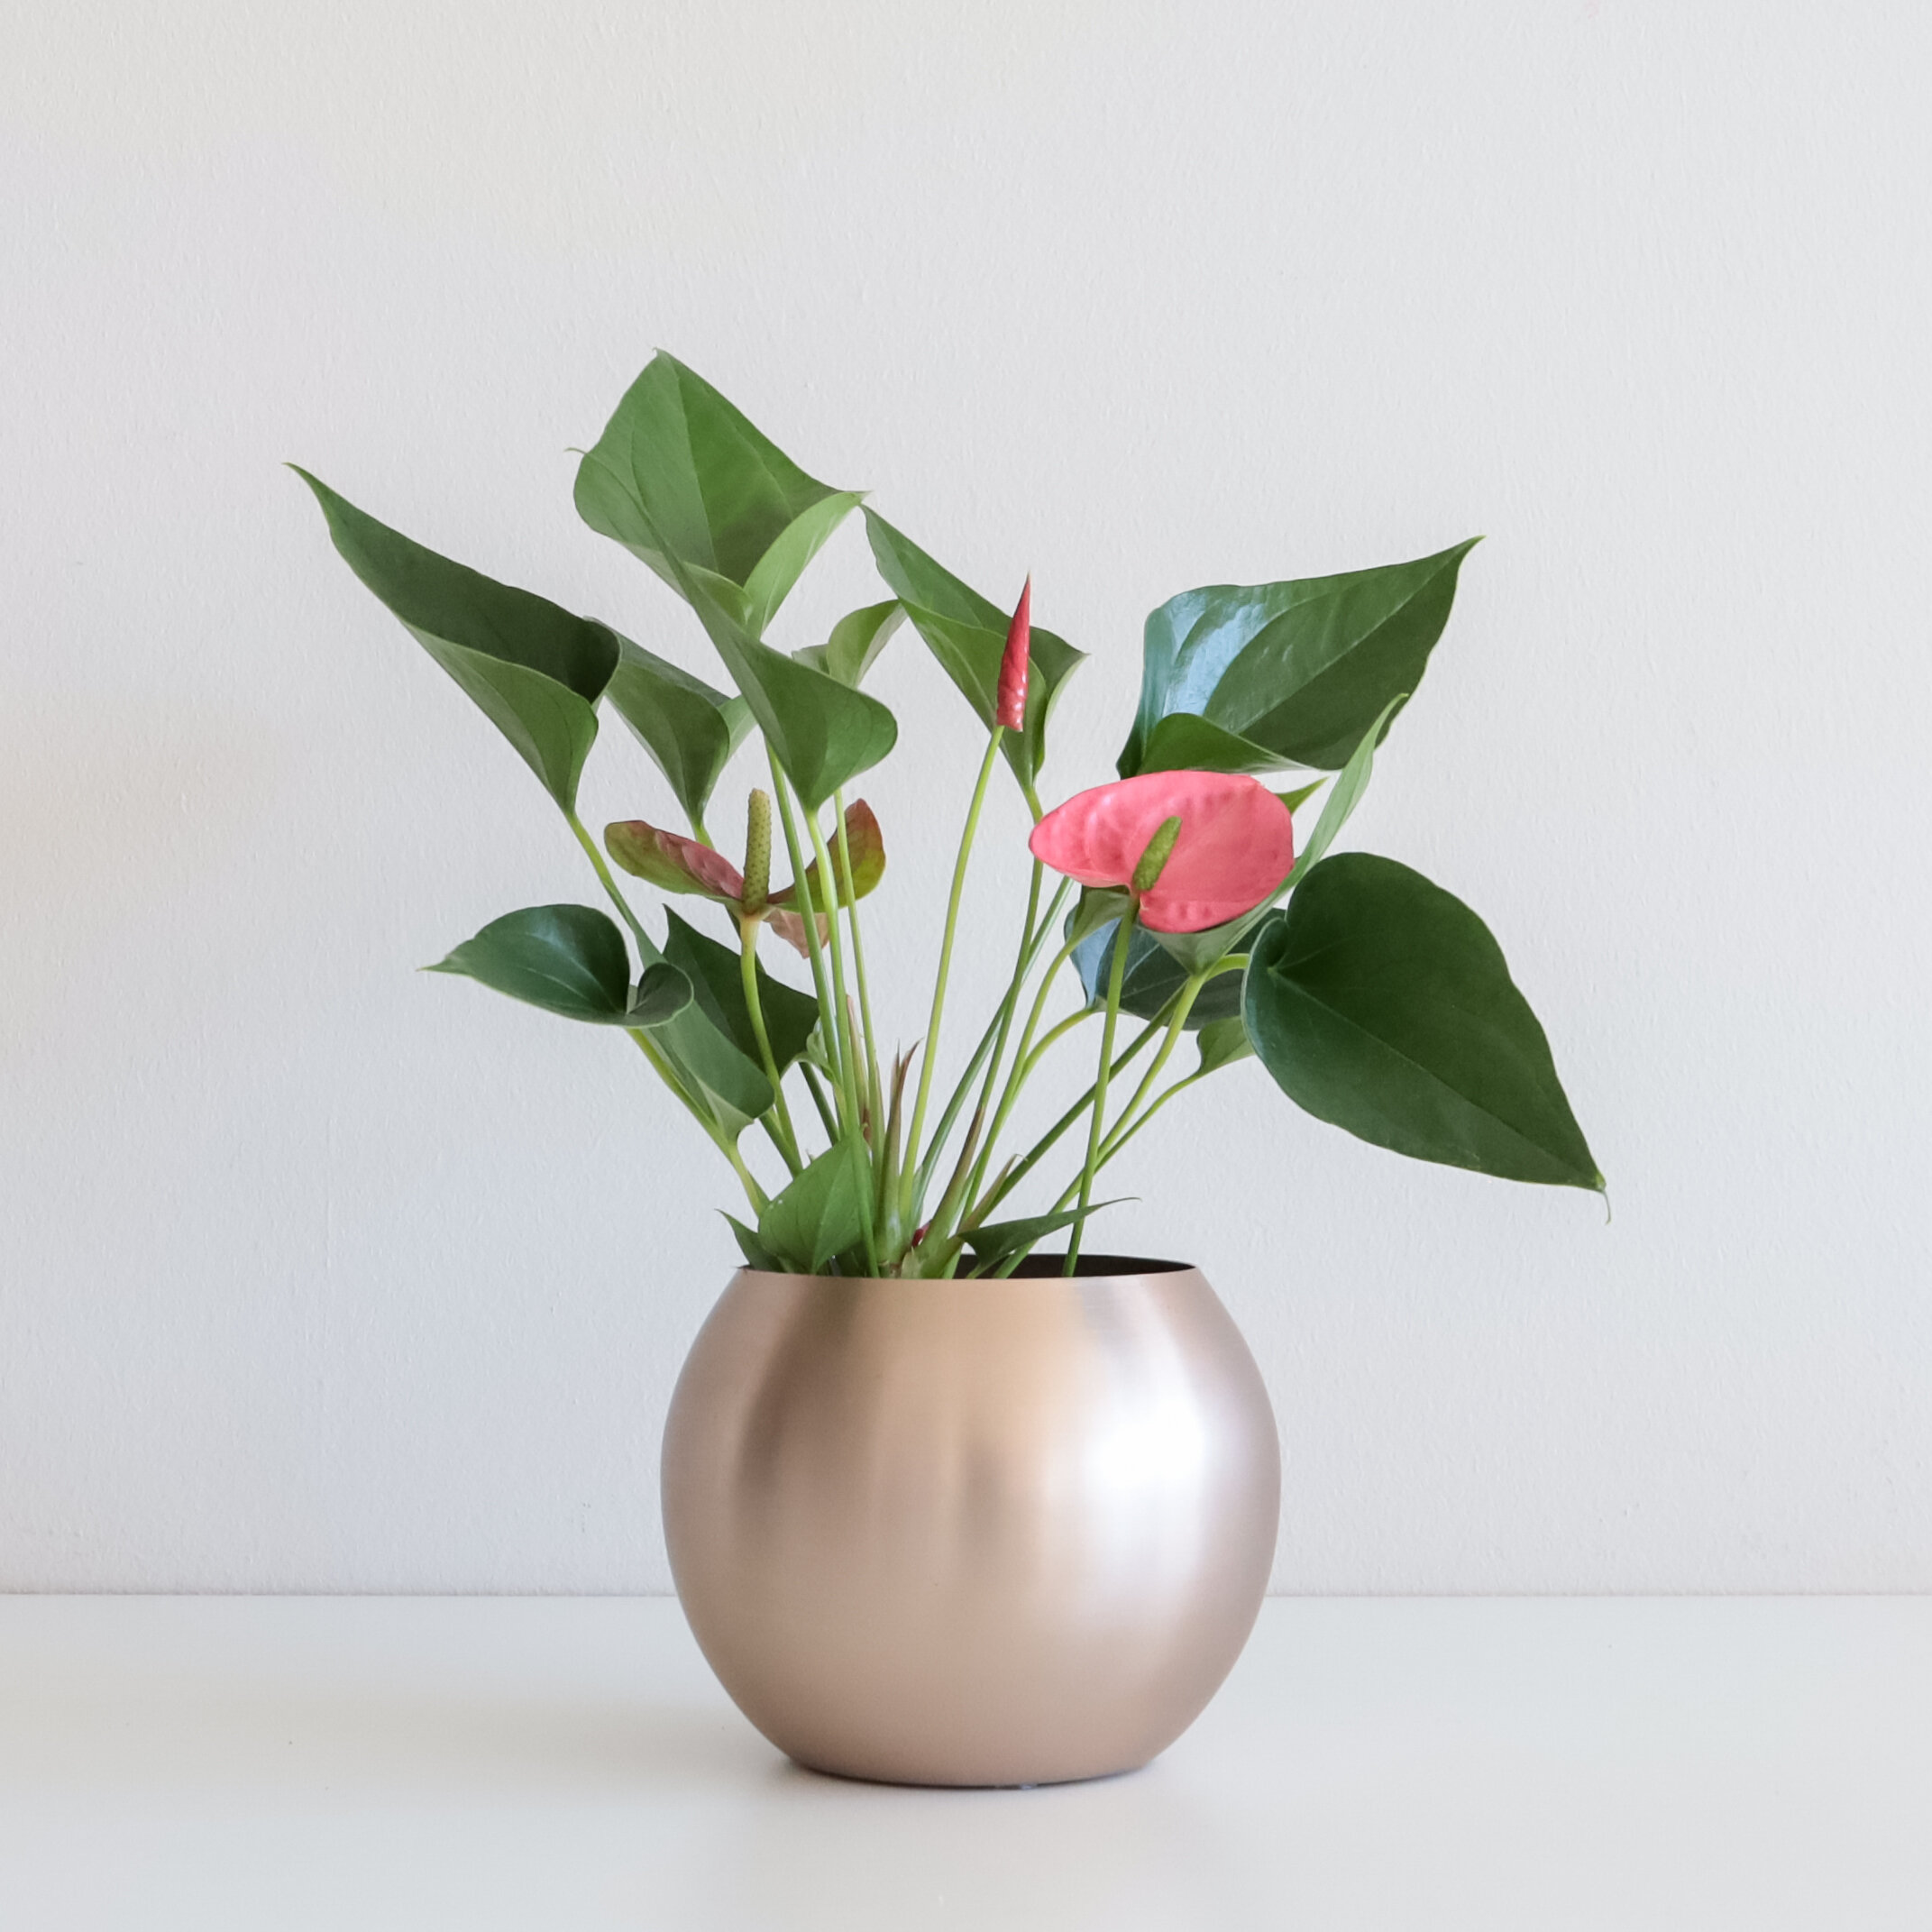 An Anthurium plant in a rose gold rounded pot sitting on a flat white surface